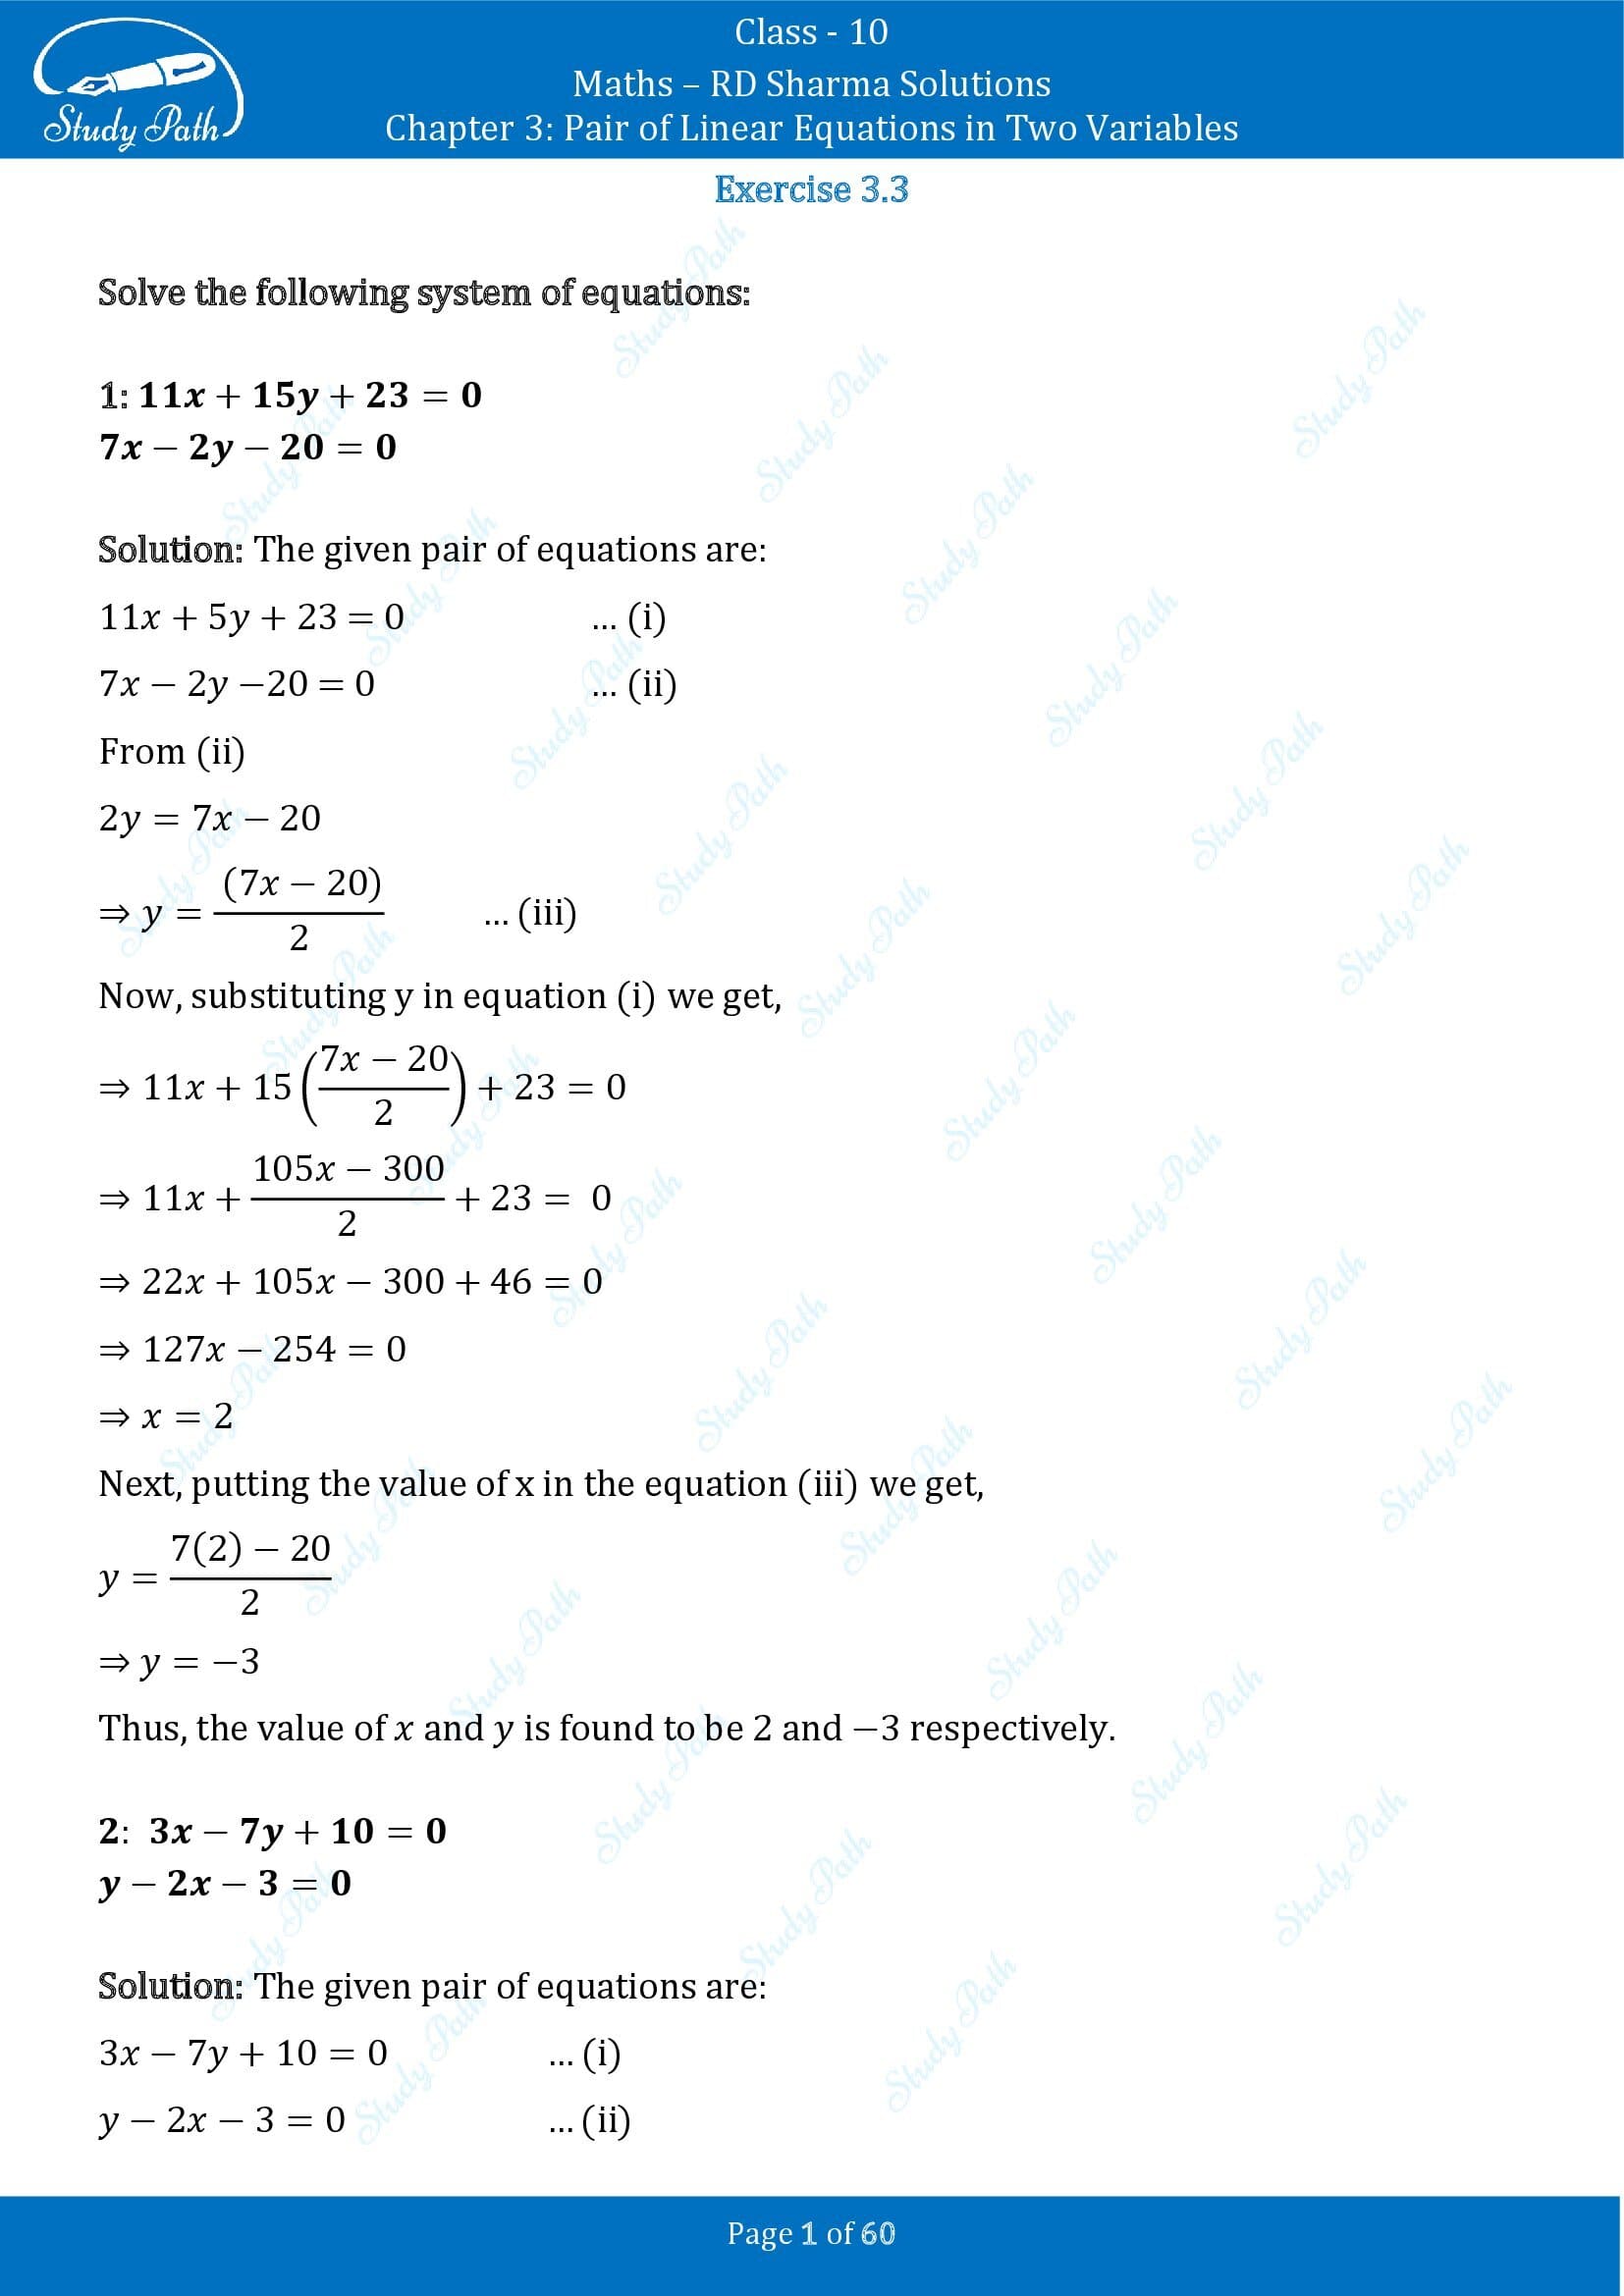 RD Sharma Solutions Class 10 Chapter 3 Pair of Linear Equations in Two Variables Exercise 3.3 00001